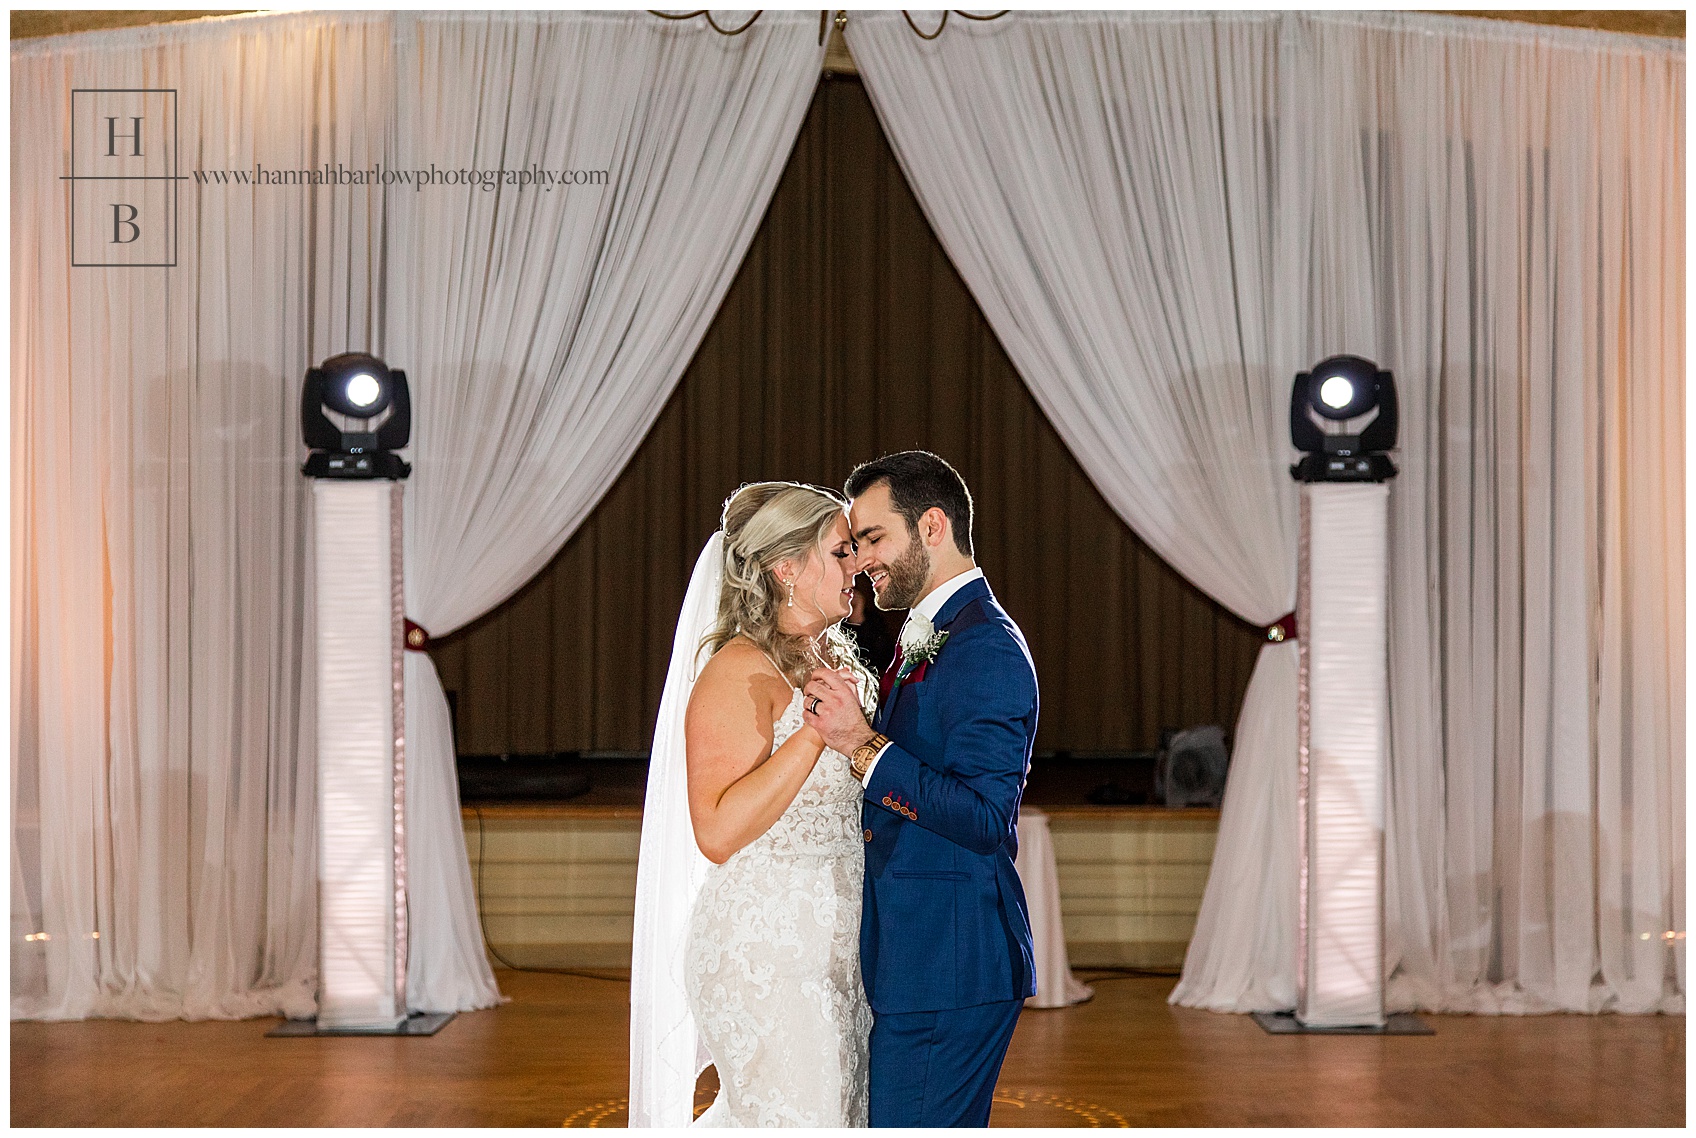 First Dance at Wheeling Wedding at the White Palace